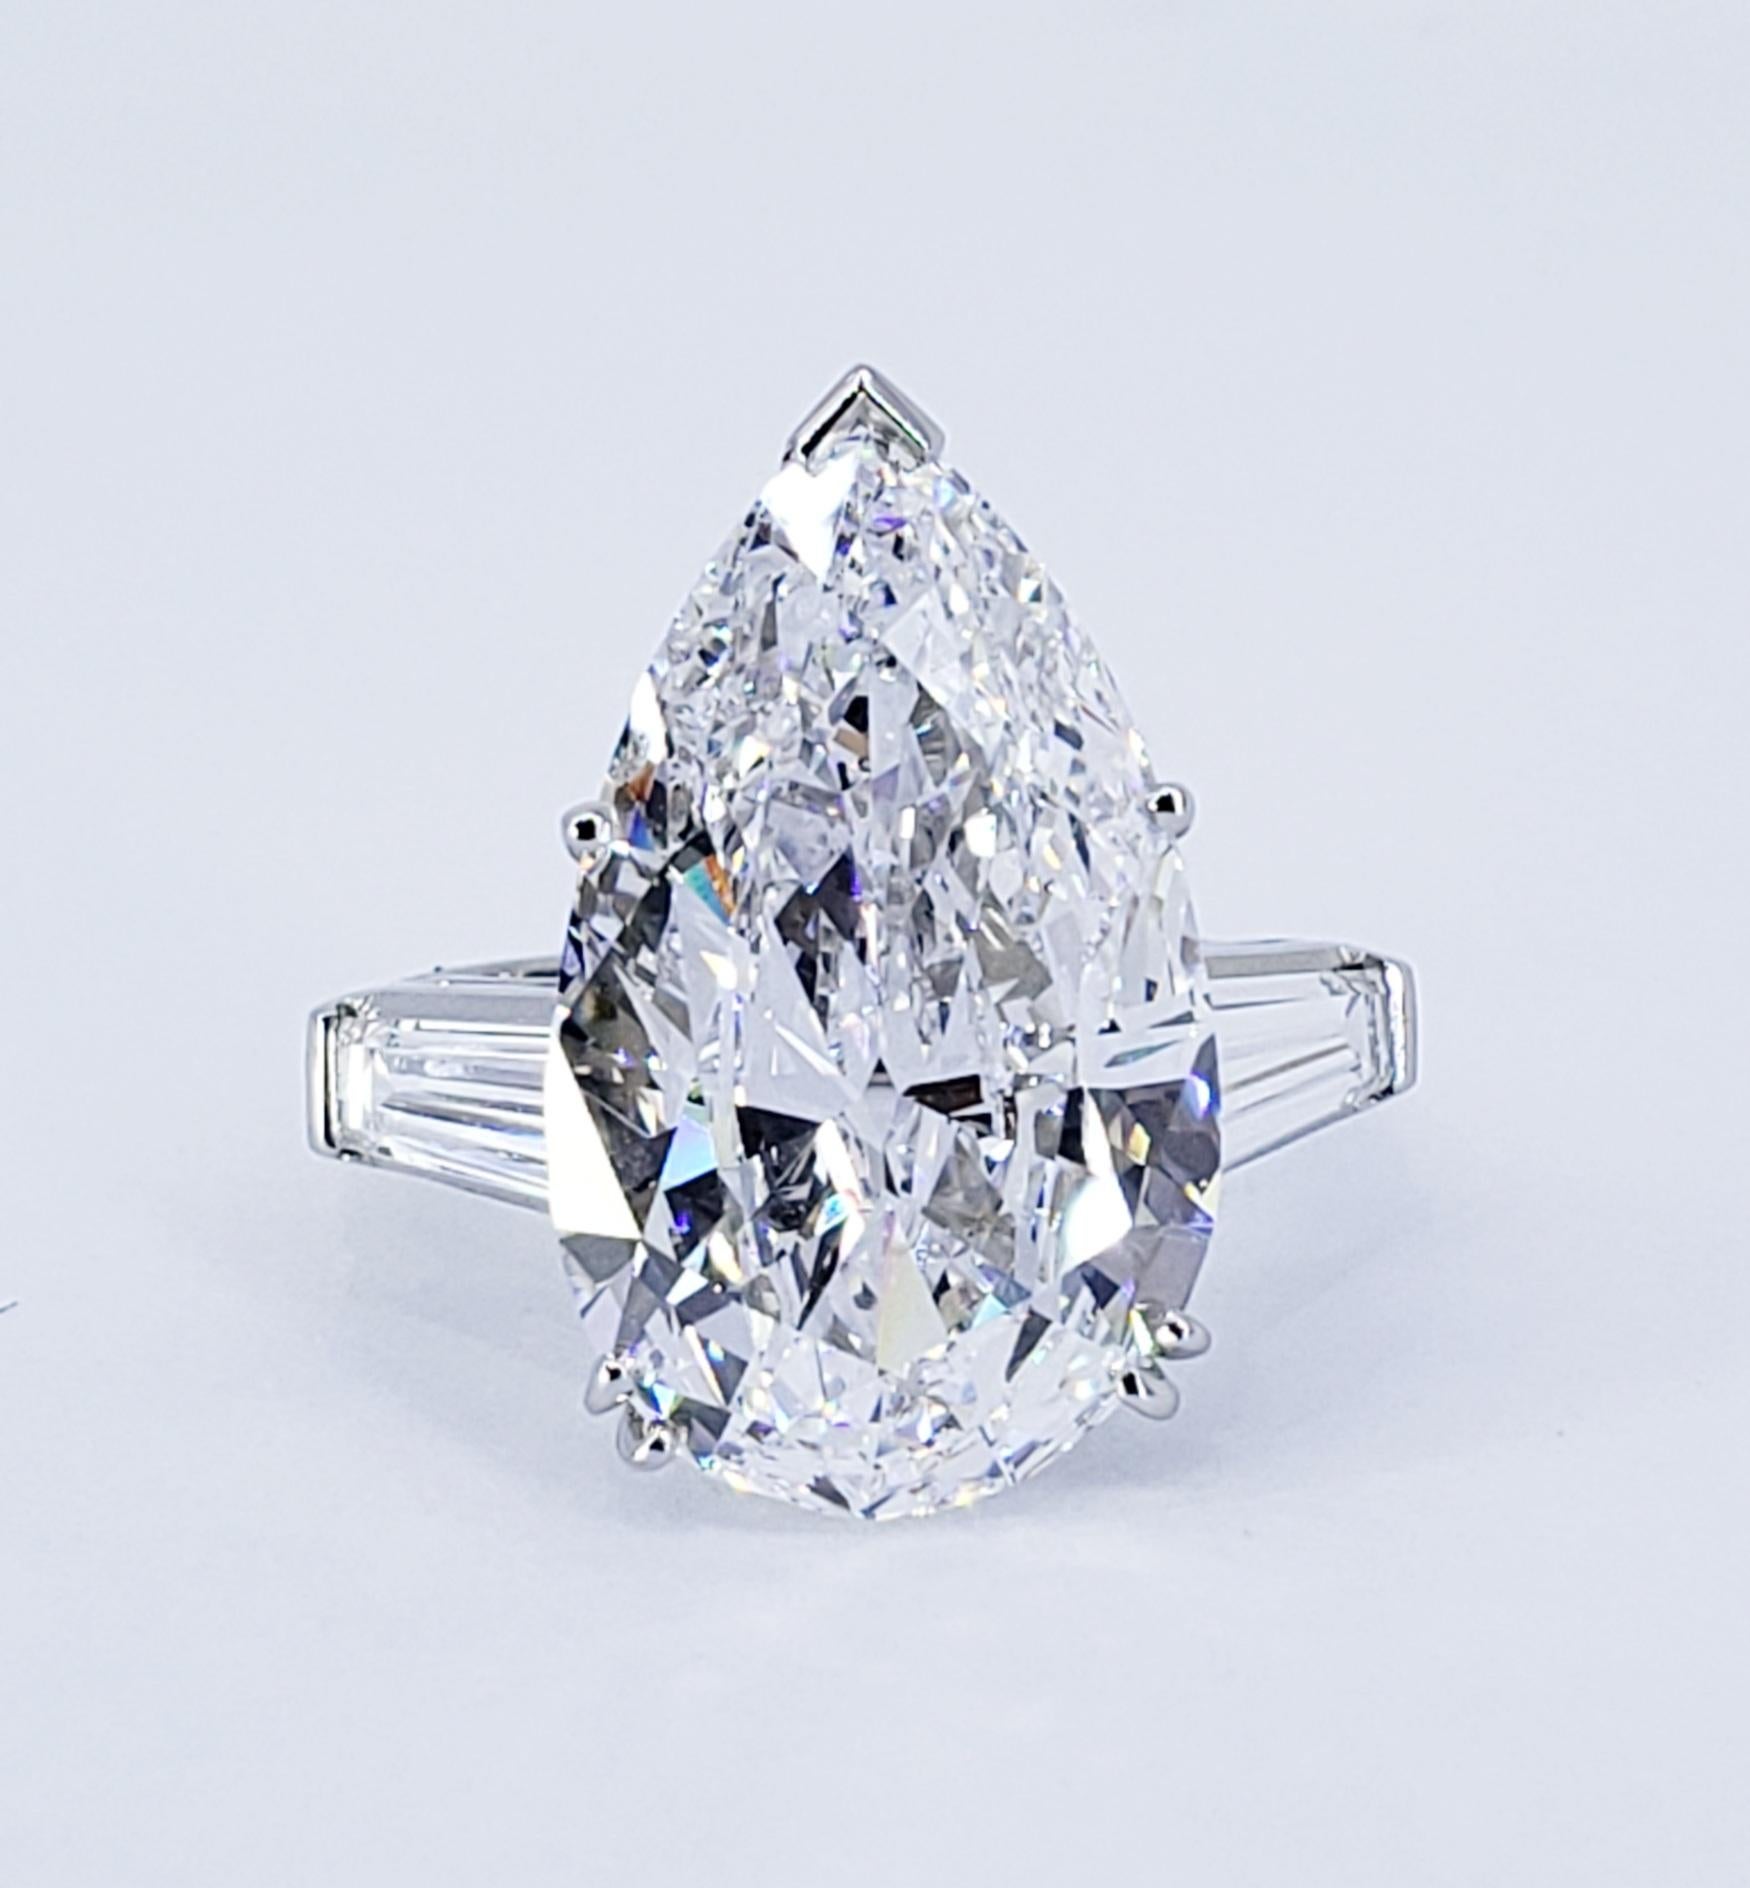 Rosenberg Diamonds & Co. 9.77 carat Pear shape D color VVS2 clarity is accompanied by a GIA certificate. This exquisite collection color pear shape diamond is a classic staple of royal elegance. This pear is set in a handmade platinum setting with